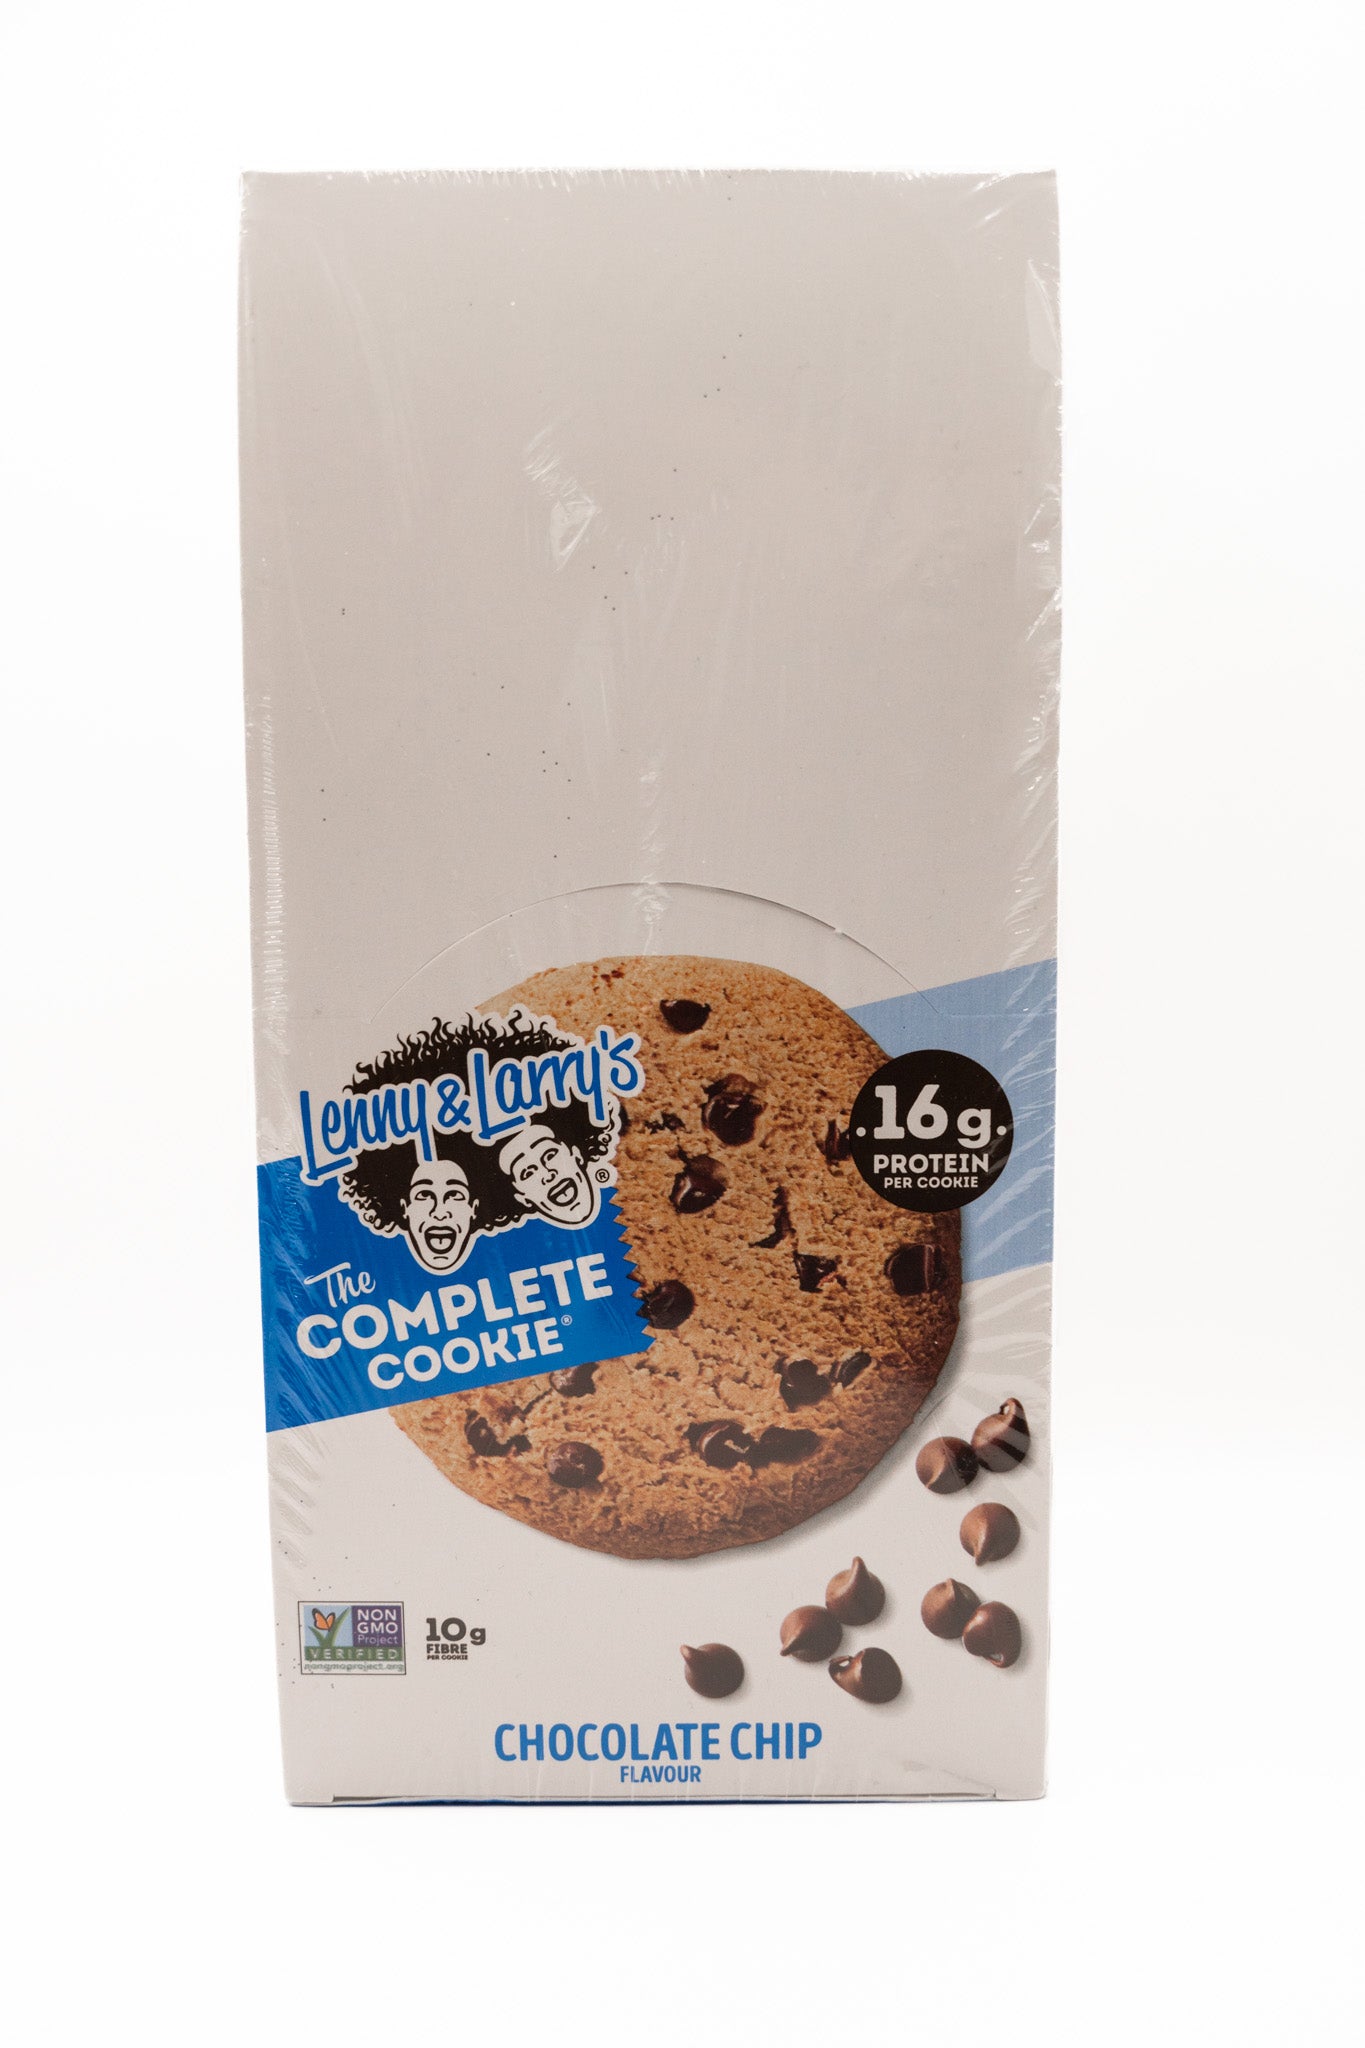 Lenny & Larry Cookie Choc Chip Box - 12 Cookies